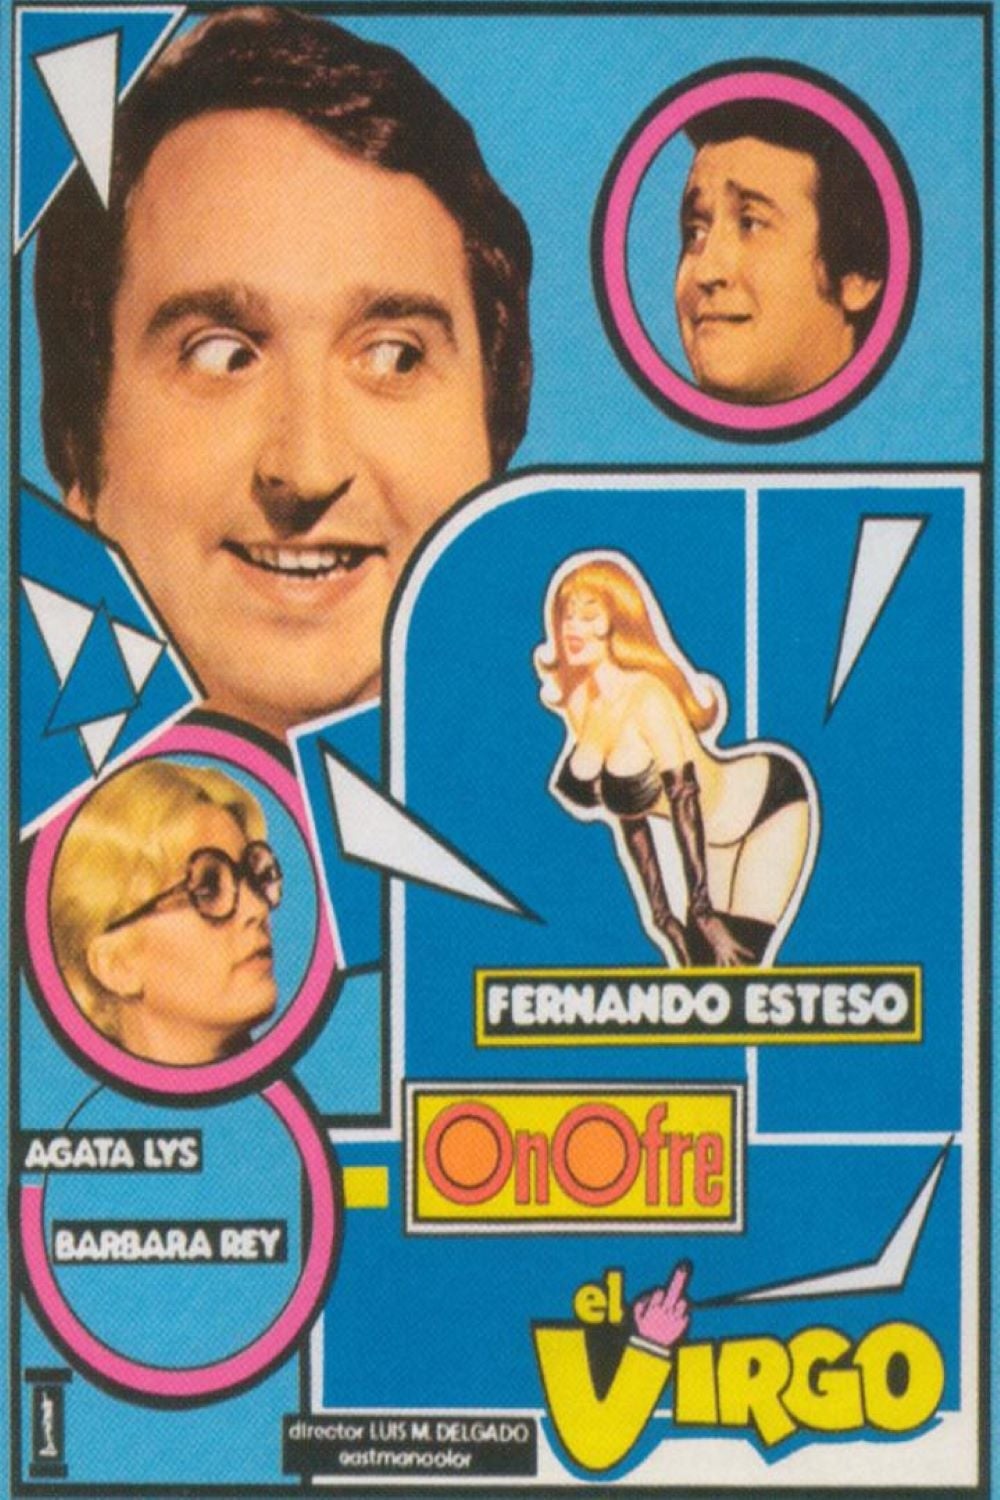 Onofre (1974)